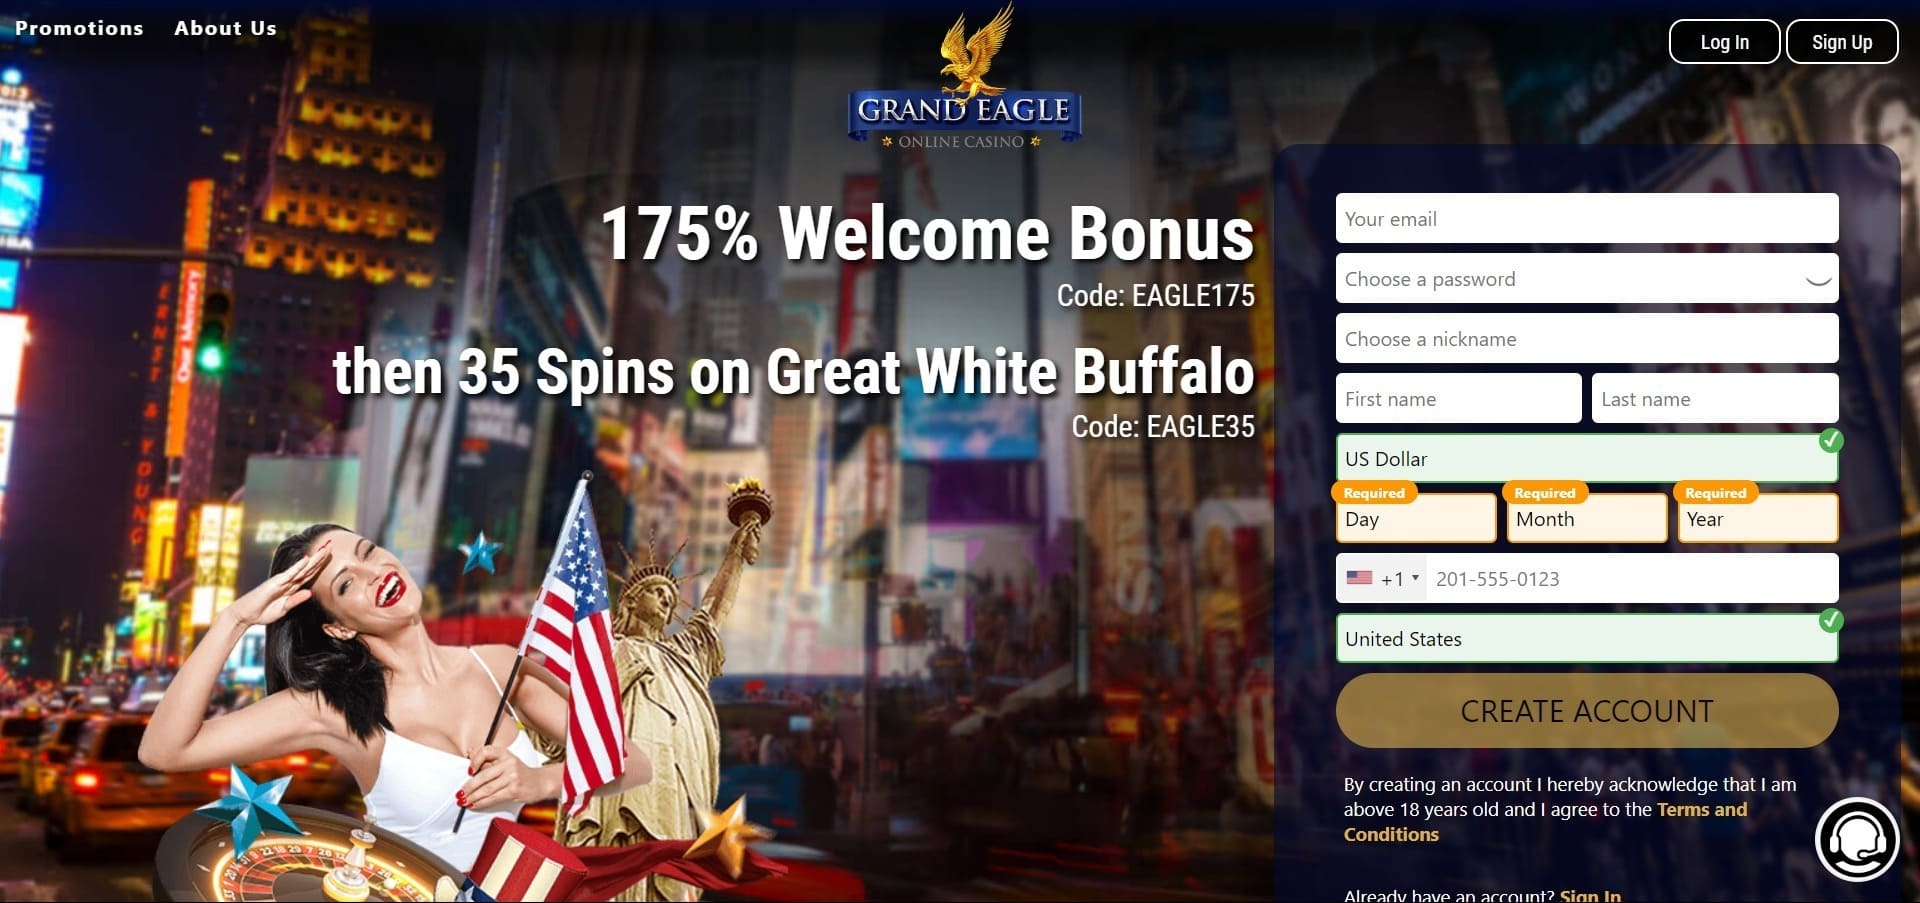 Official website of the Grand Eagle